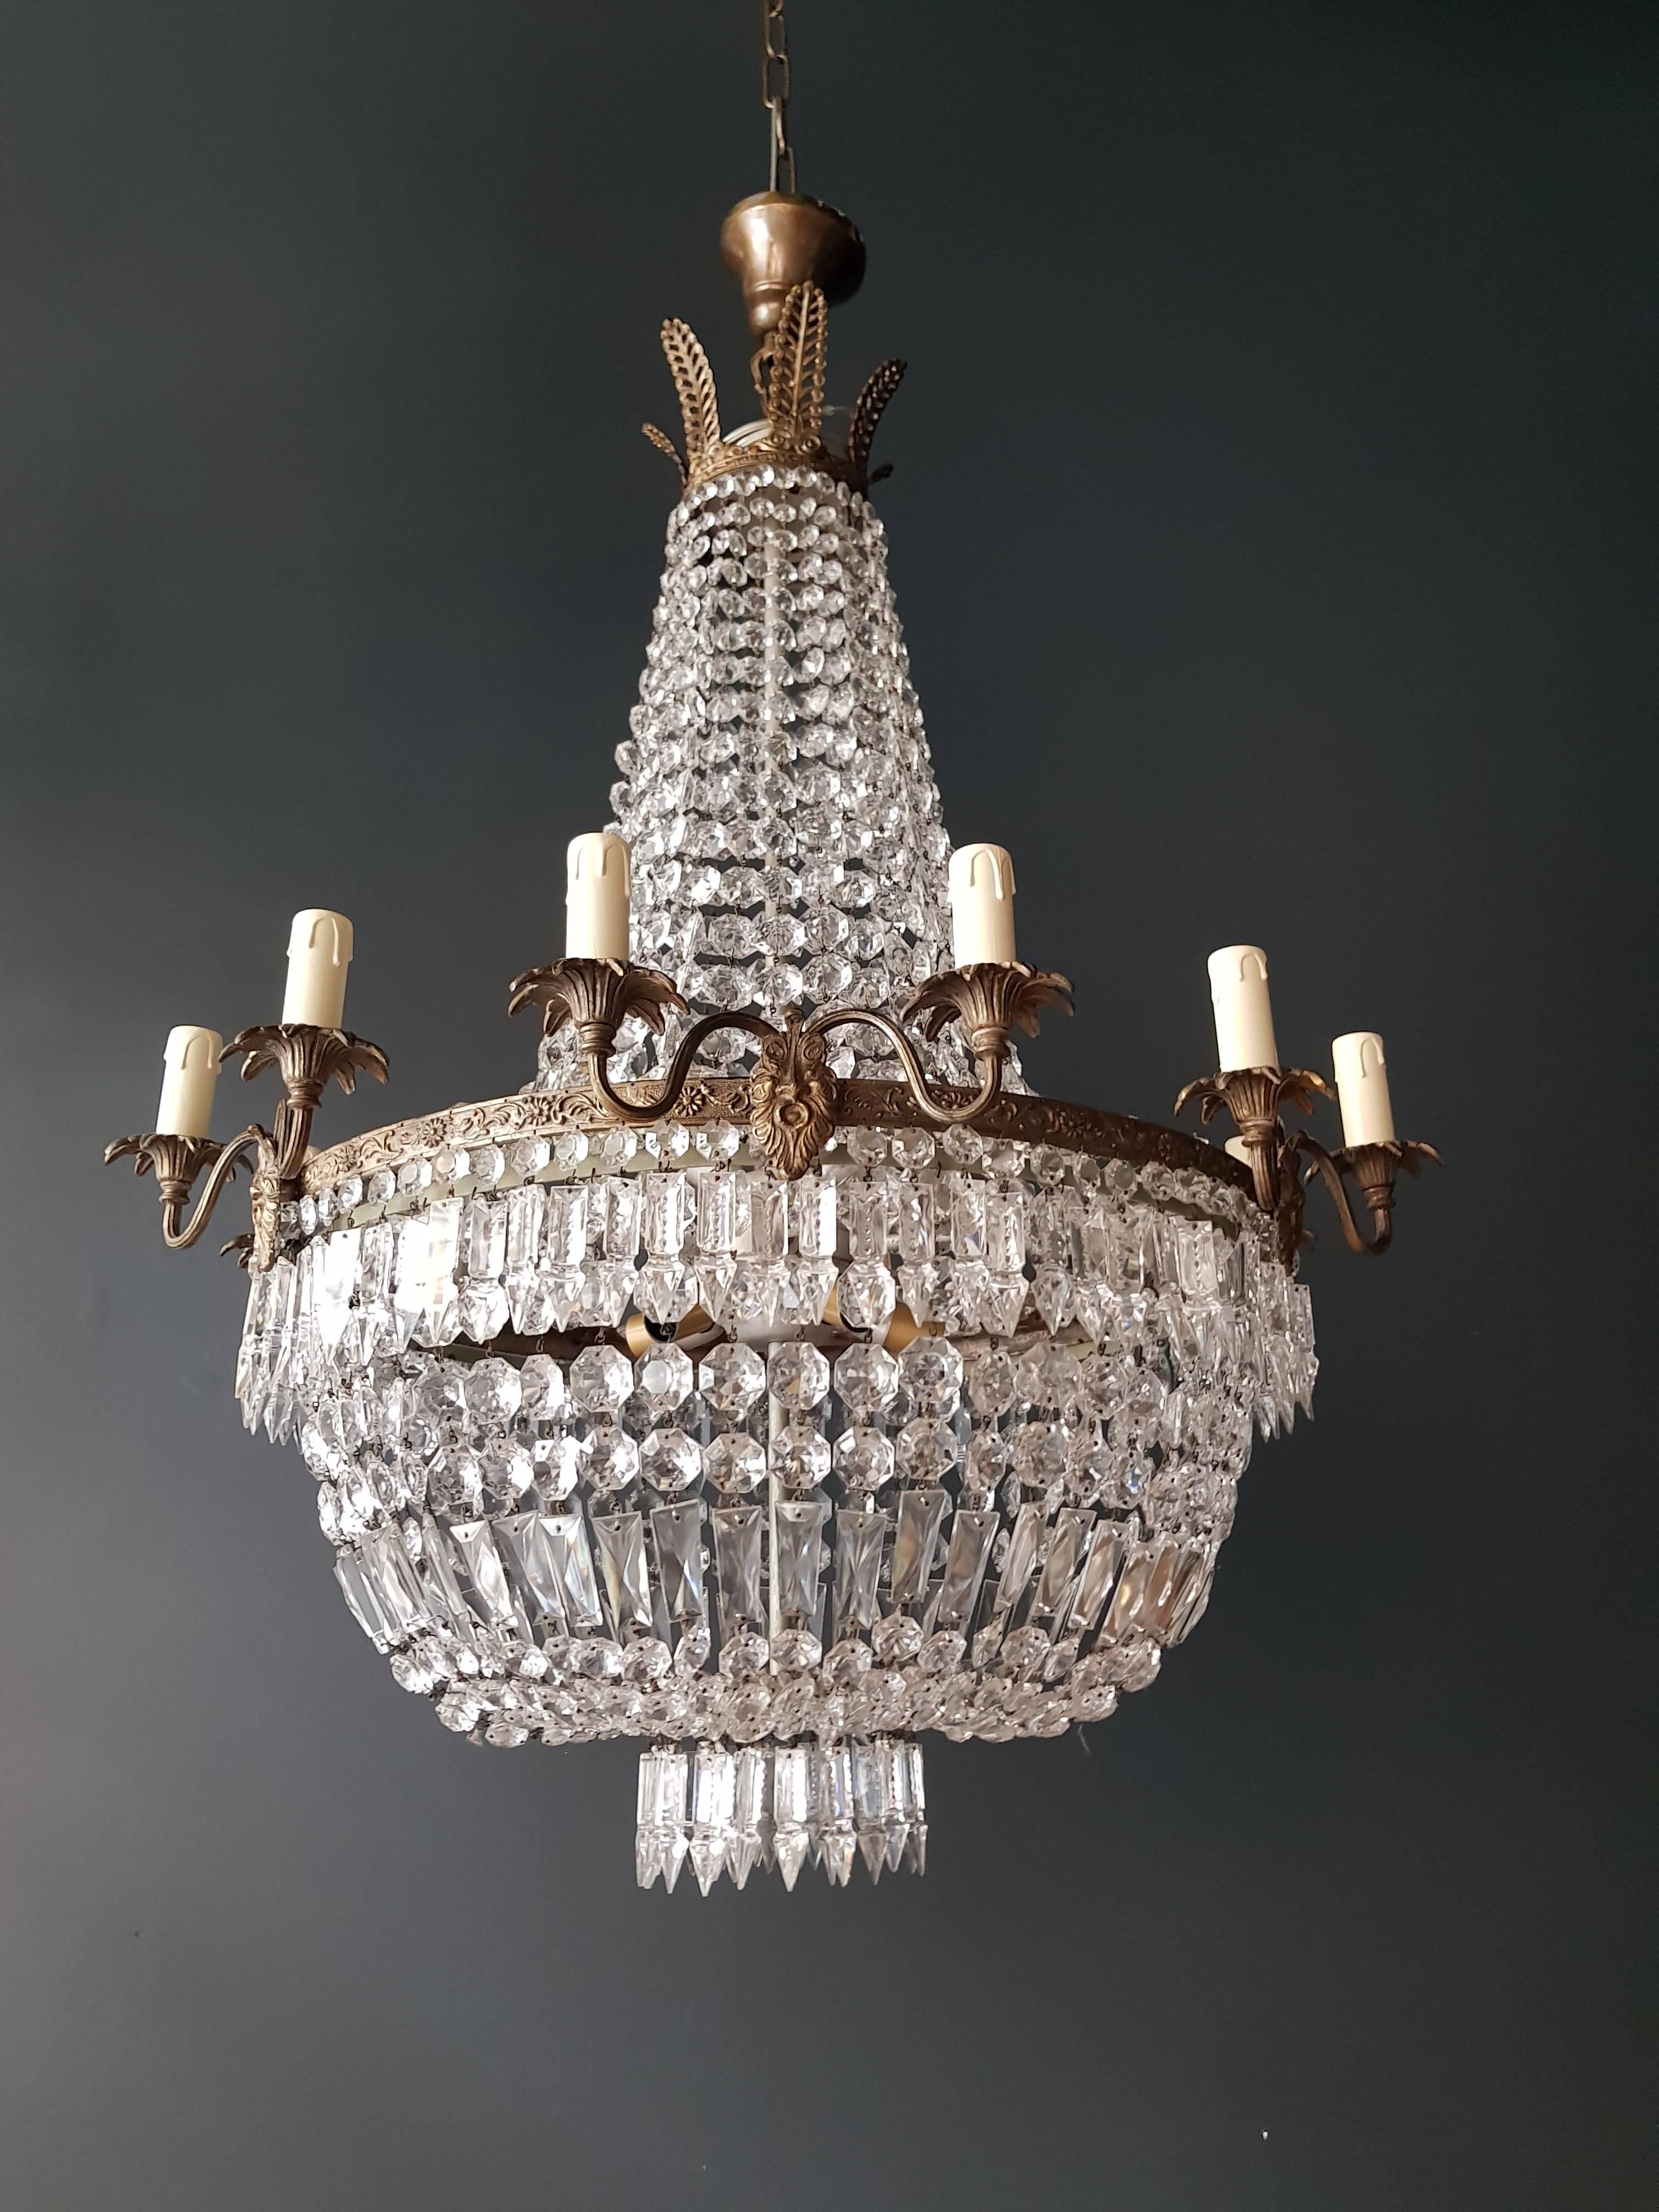 Sac a pearl chandelier crystal hall
Original preserved chandelier, circa 1920. Cabling and sockets completely renewed. Crystal hand-knotted.
Measures: Total height 150 cm, height without chain 99 cm, diameter 75 cm, weight (approximately)